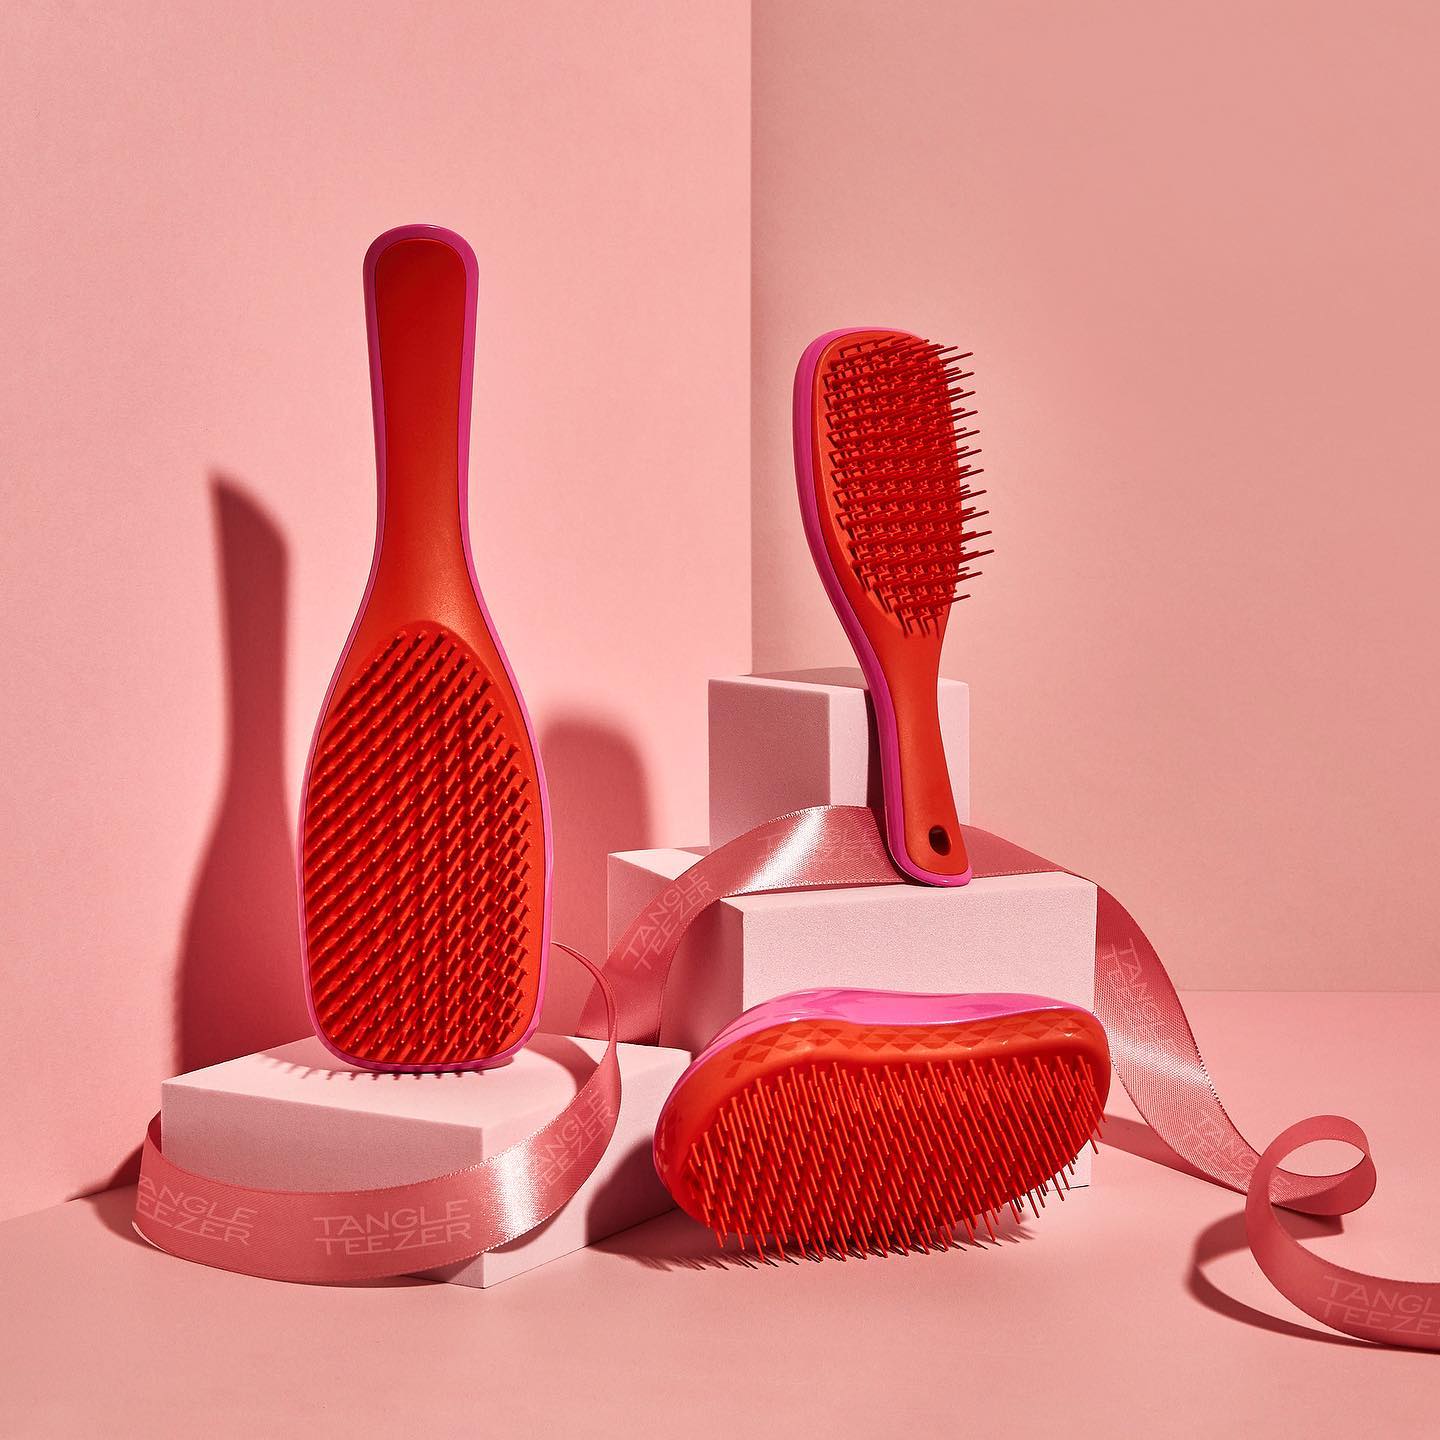 Tangle Teezer look to global business leaders for innovation